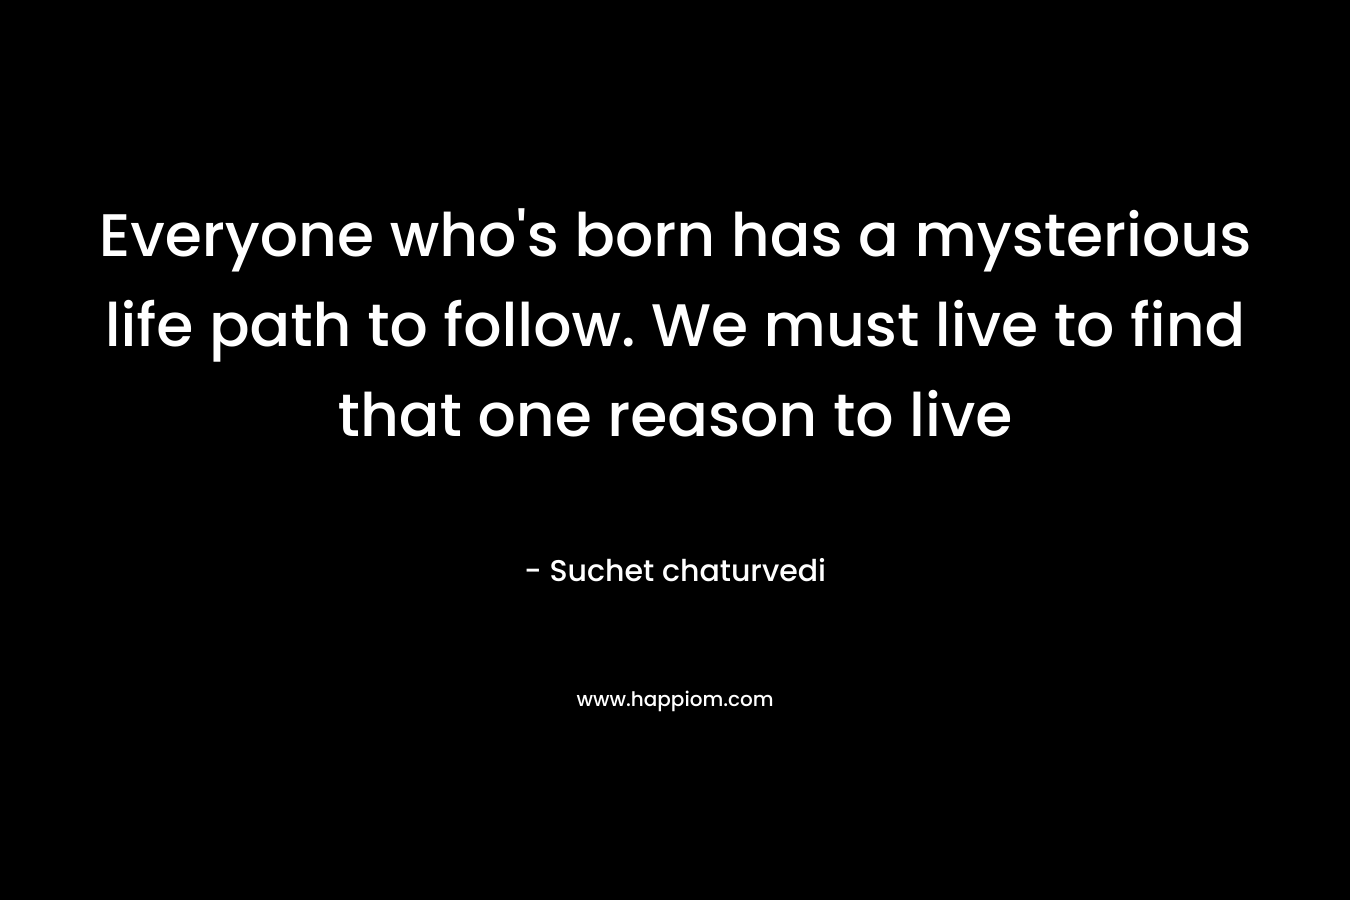 Everyone who's born has a mysterious life path to follow. We must live to find that one reason to live